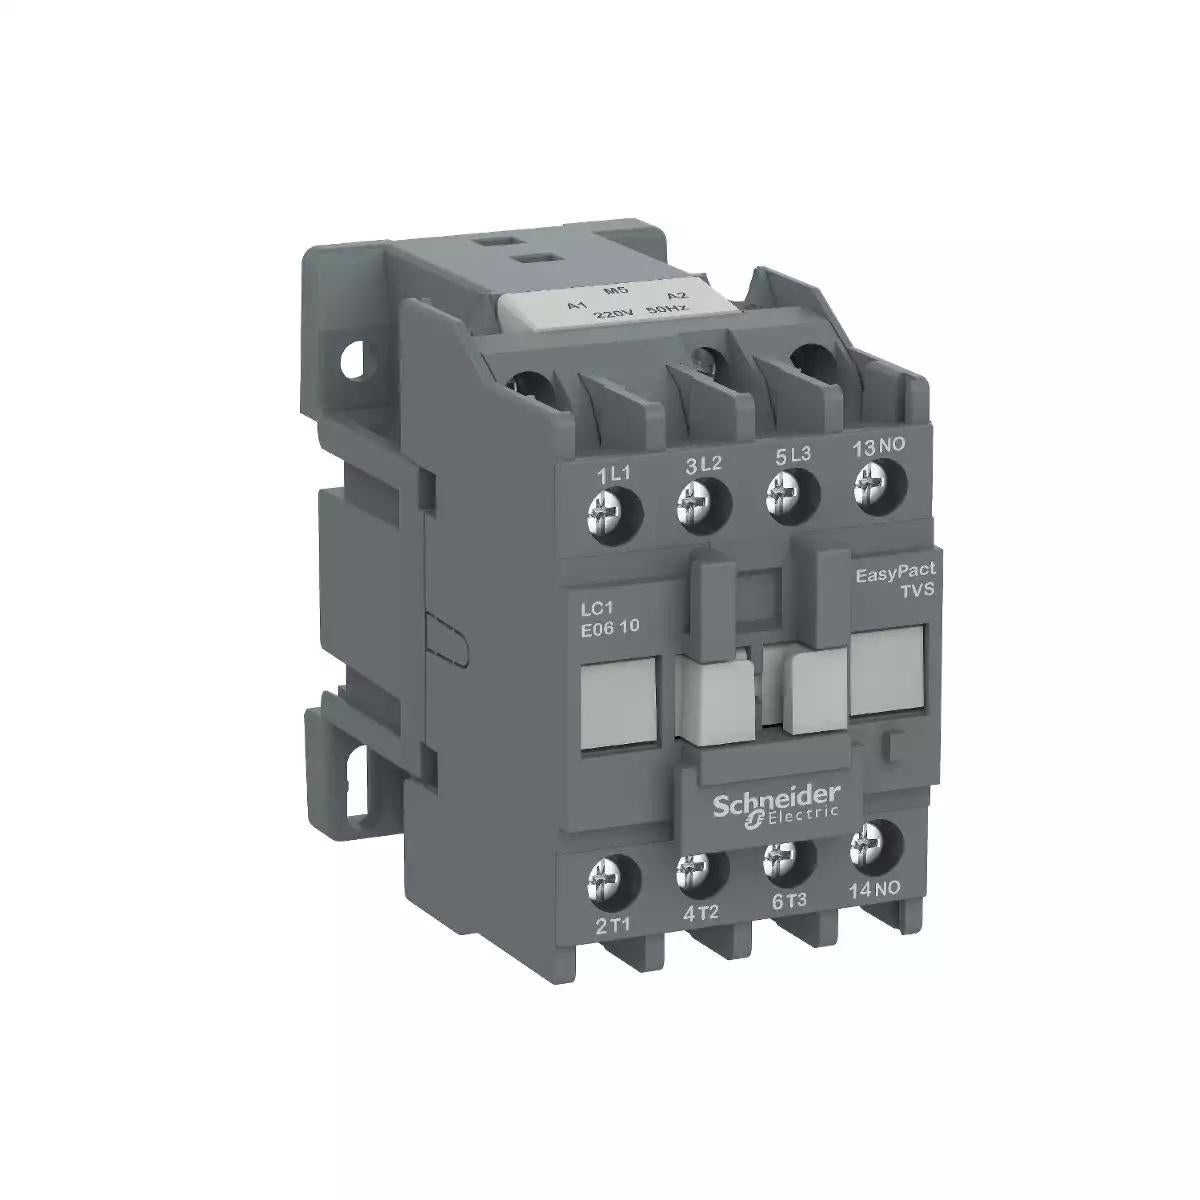 Contactor,EasyPact TVS,3P(3NO),AC-3,<=440V,9A,220V AC coil,50/60Hz,1NC auxiliary contact